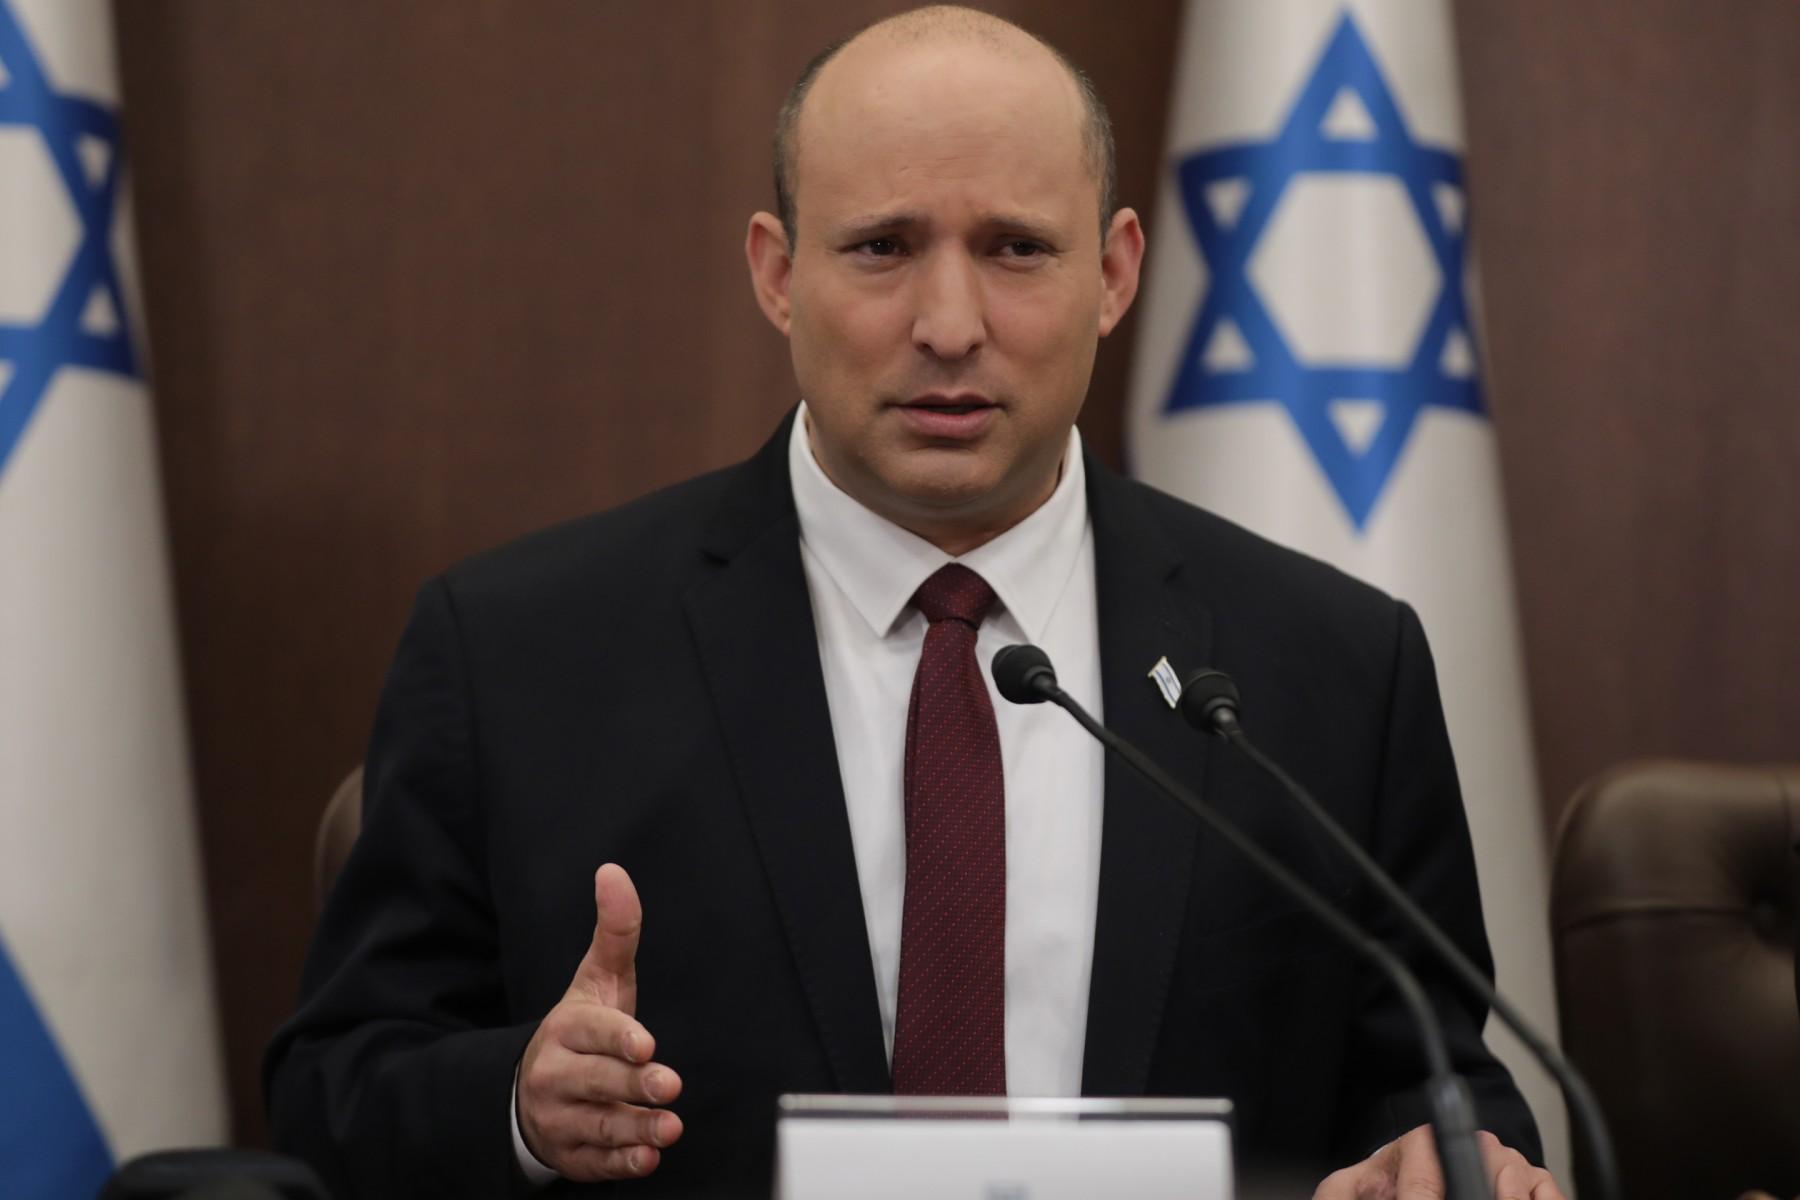 Israeli Prime Minister Naftali Bennett chairs a weekly cabinet meeting at the Prime Minister's Office in Jerusalem, on June 19. Photo: AFP